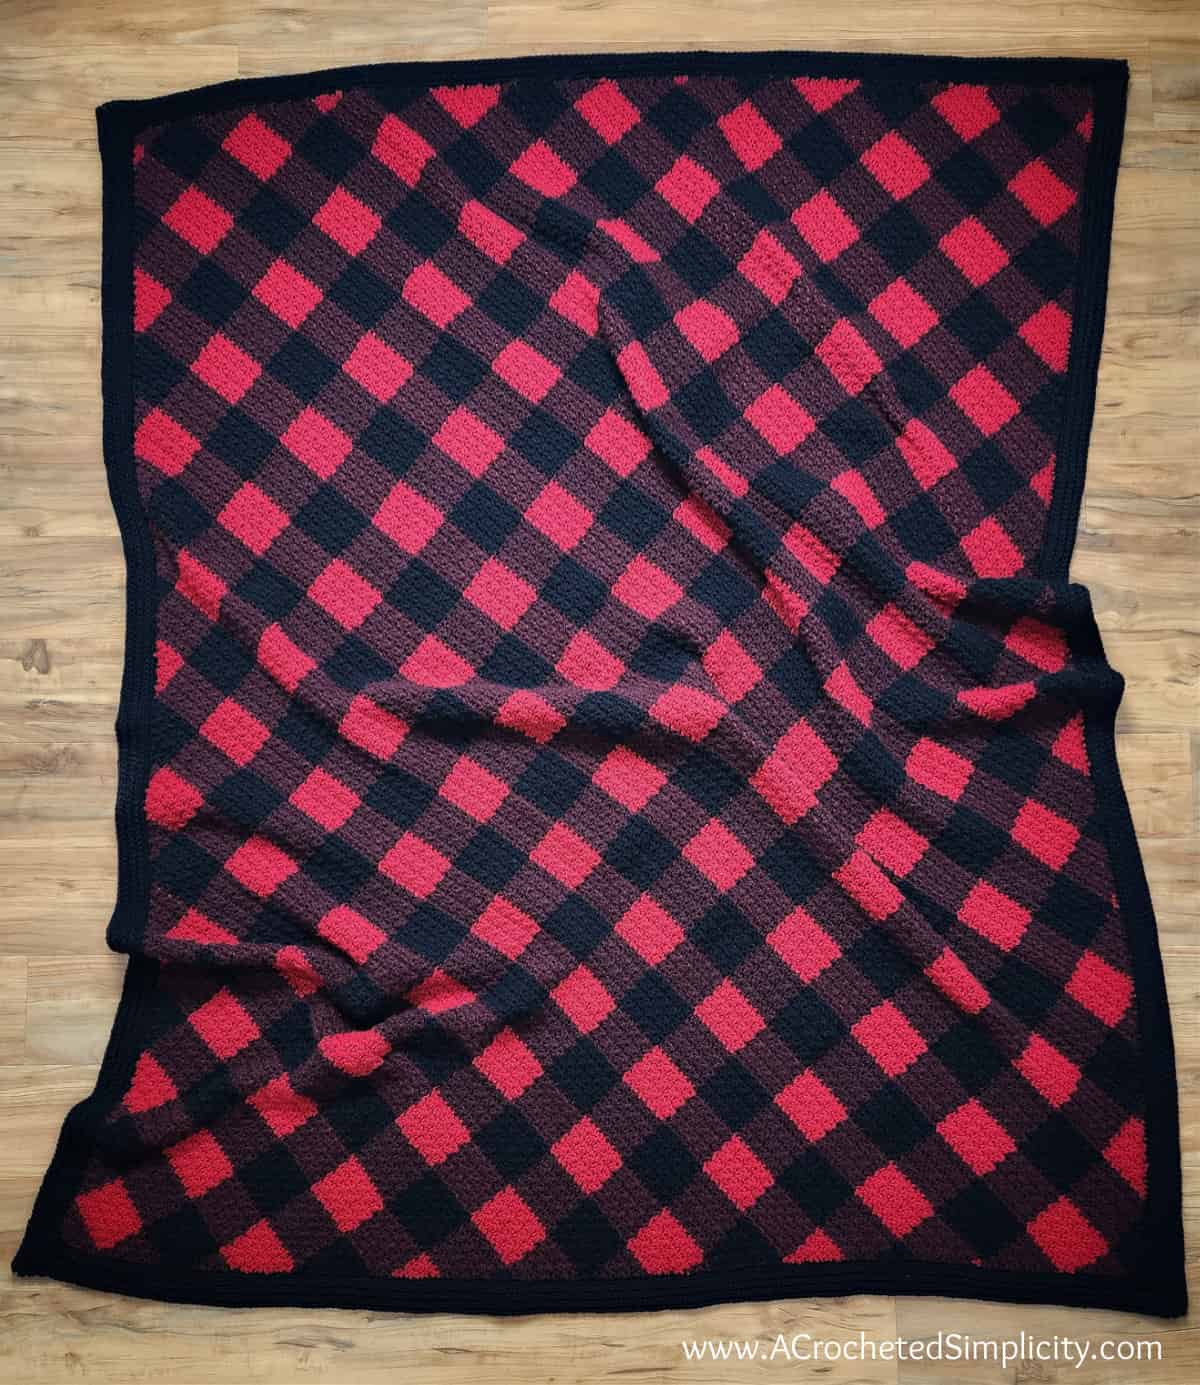 Traditional red and black c2c crochet buffalo plaid blanket laid out on wood floor.